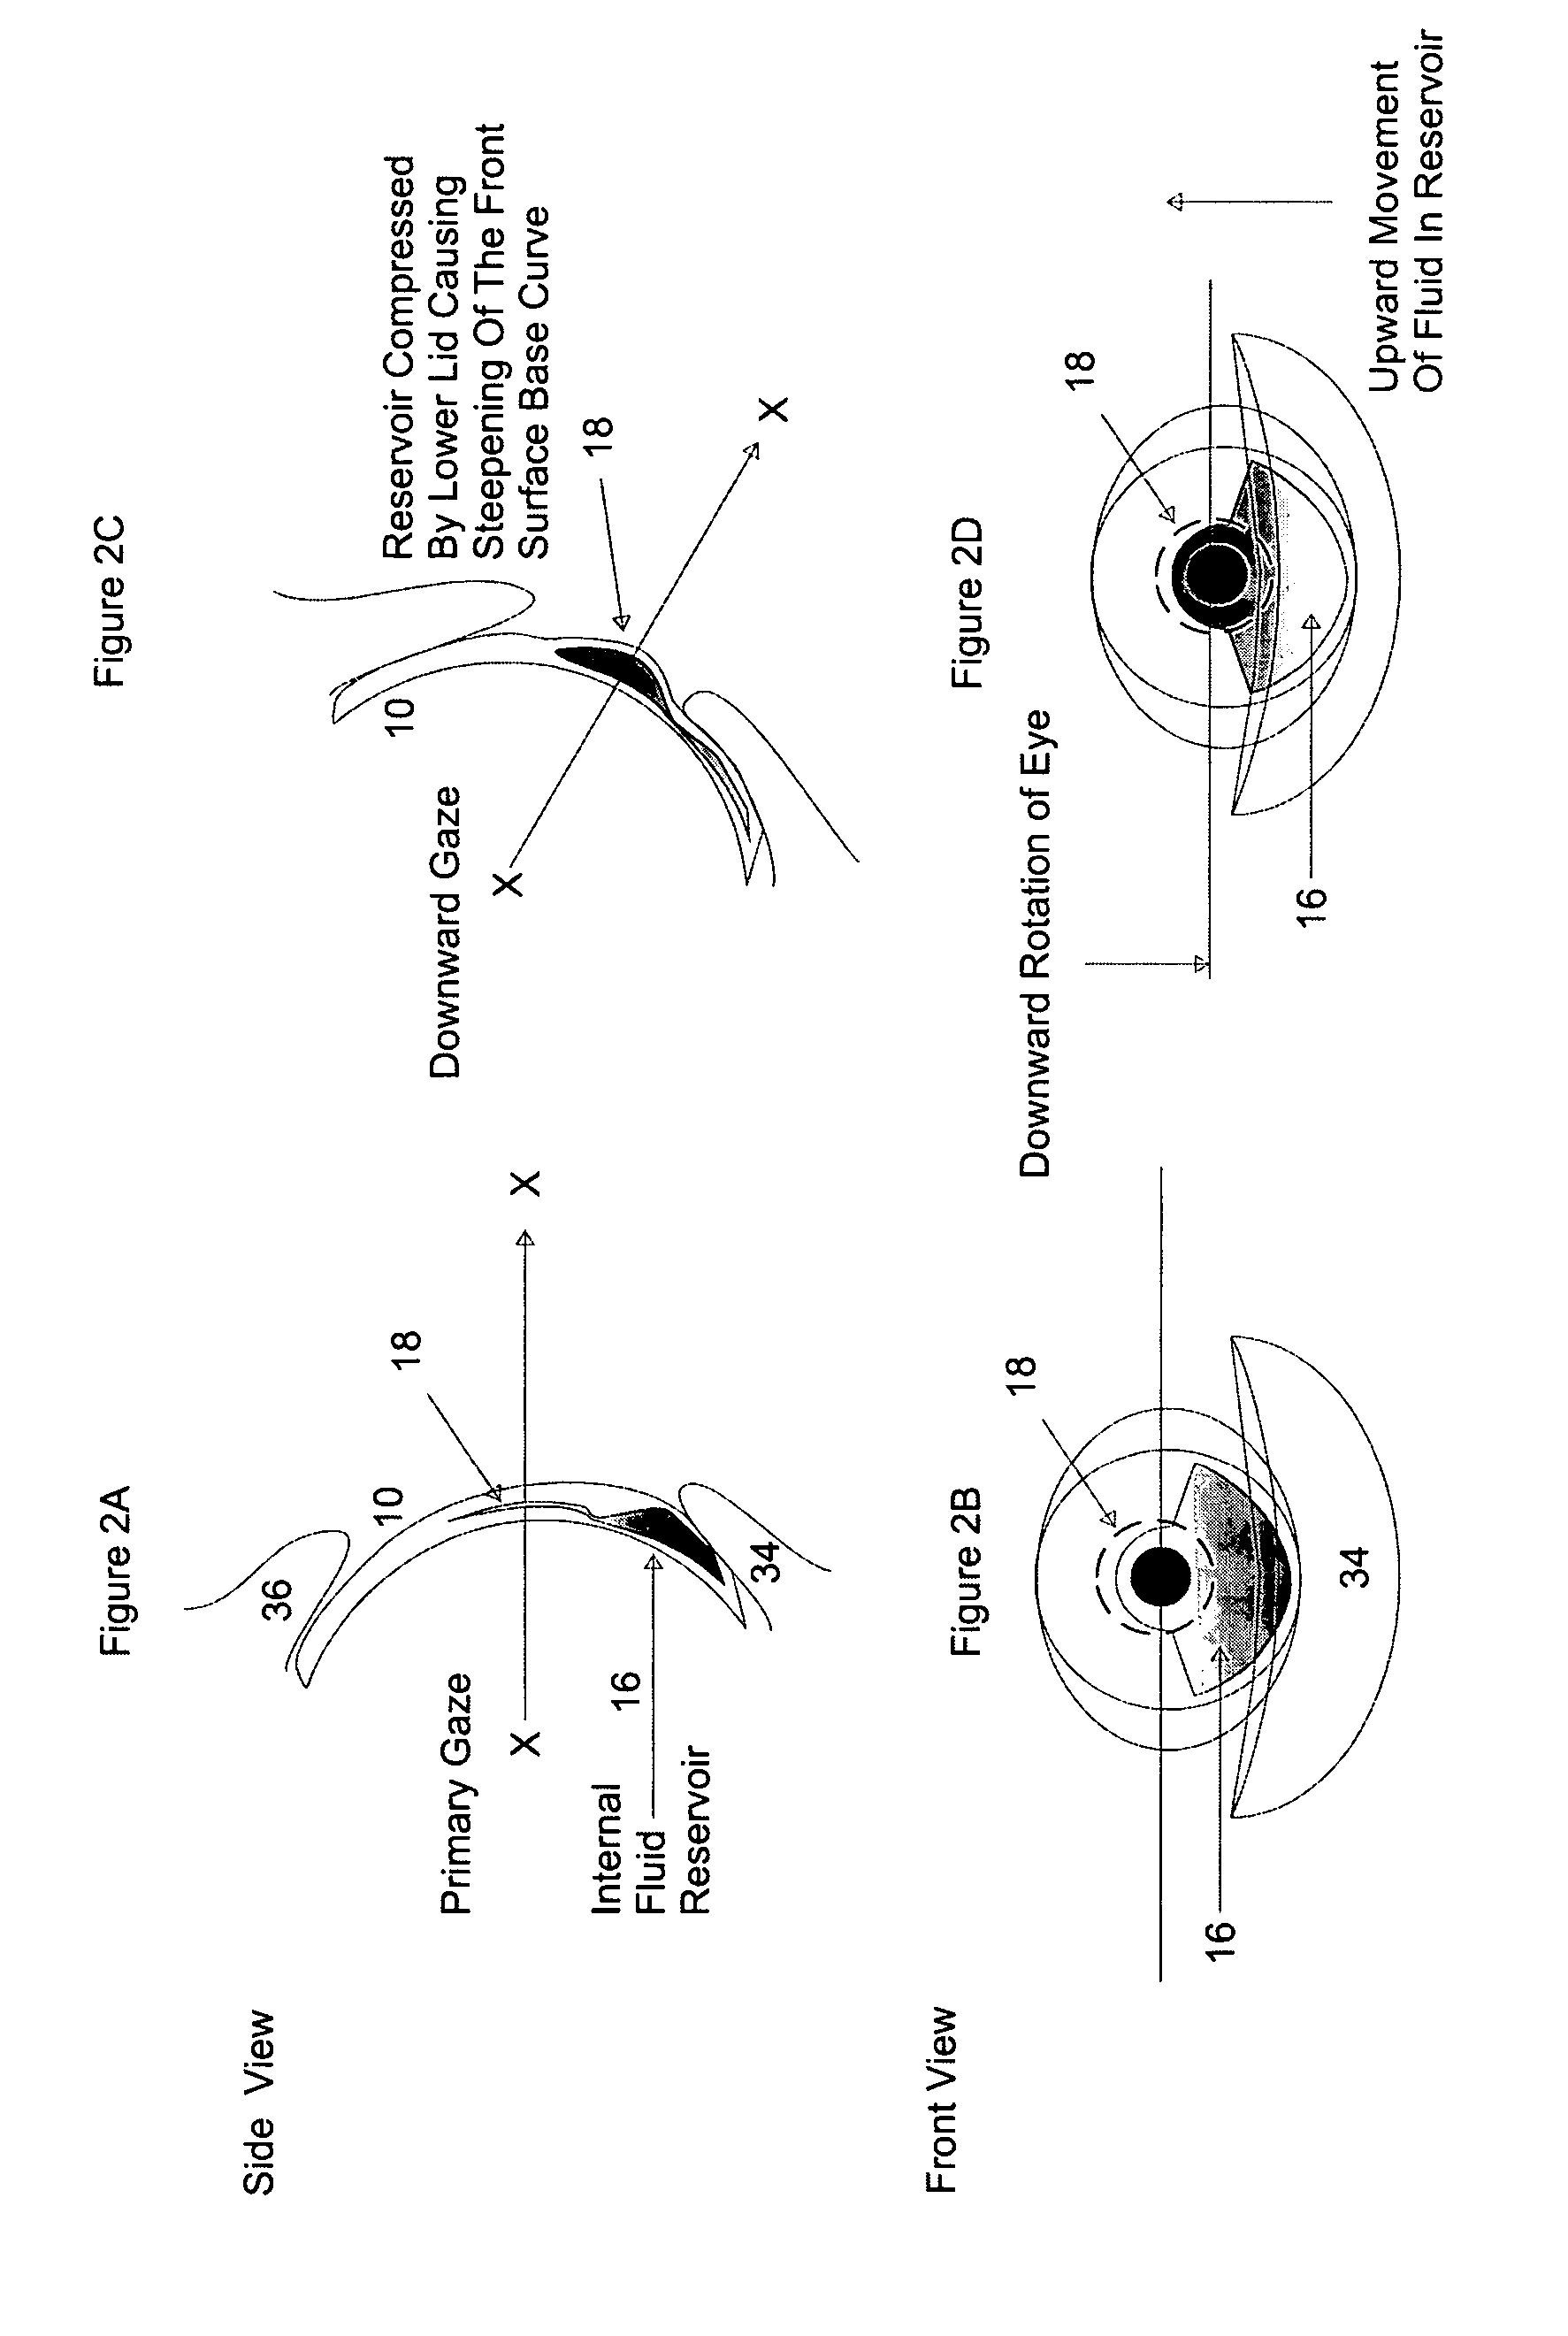 Hydrodynamically operated multifocal contact lens